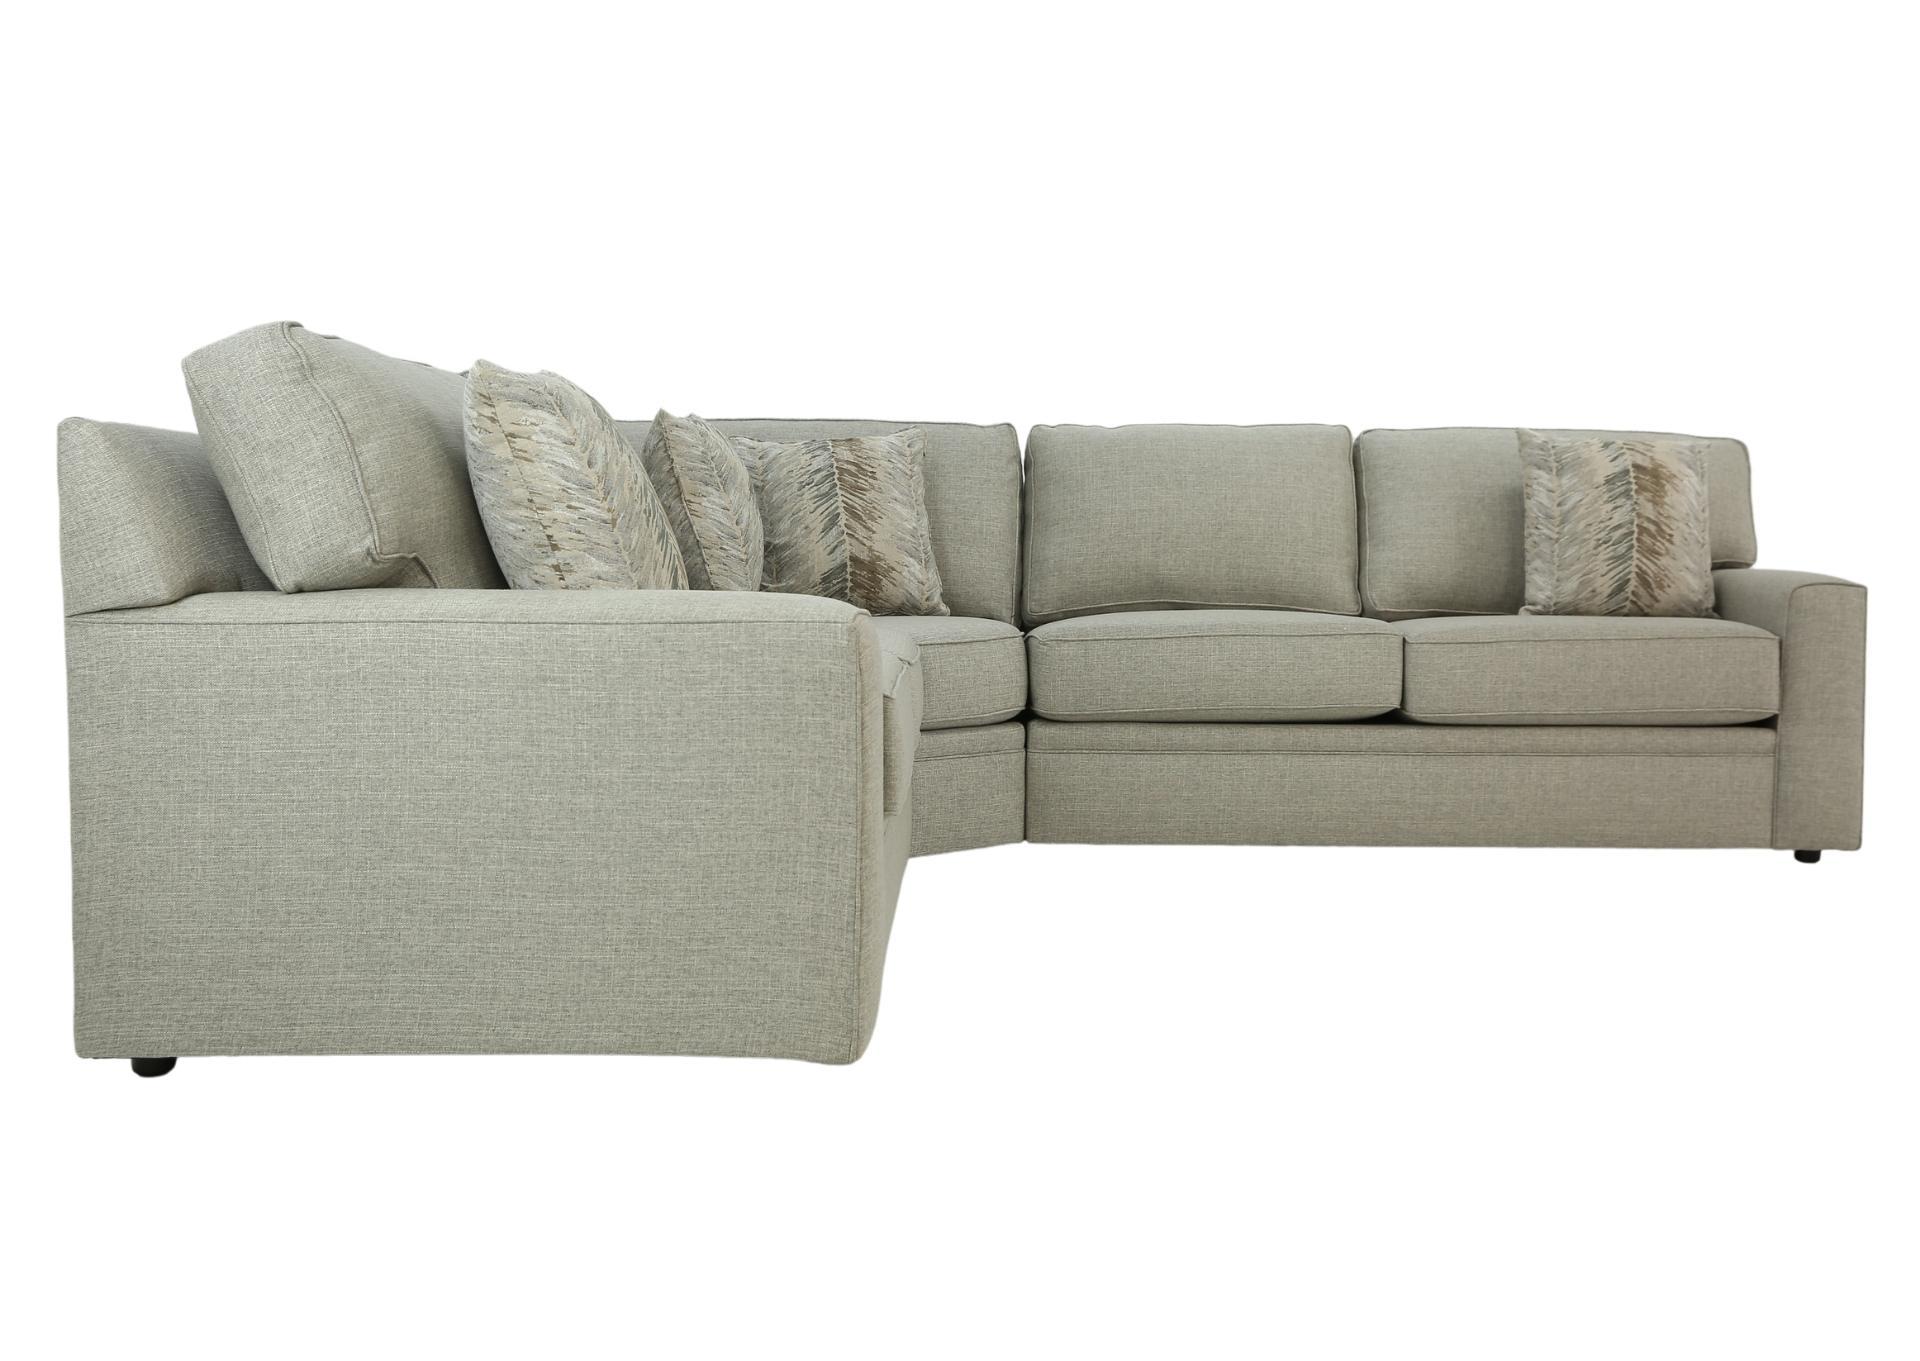 PENELOPE 3 PIECE SECTIONAL,STONE & LEIGH FURNITURE